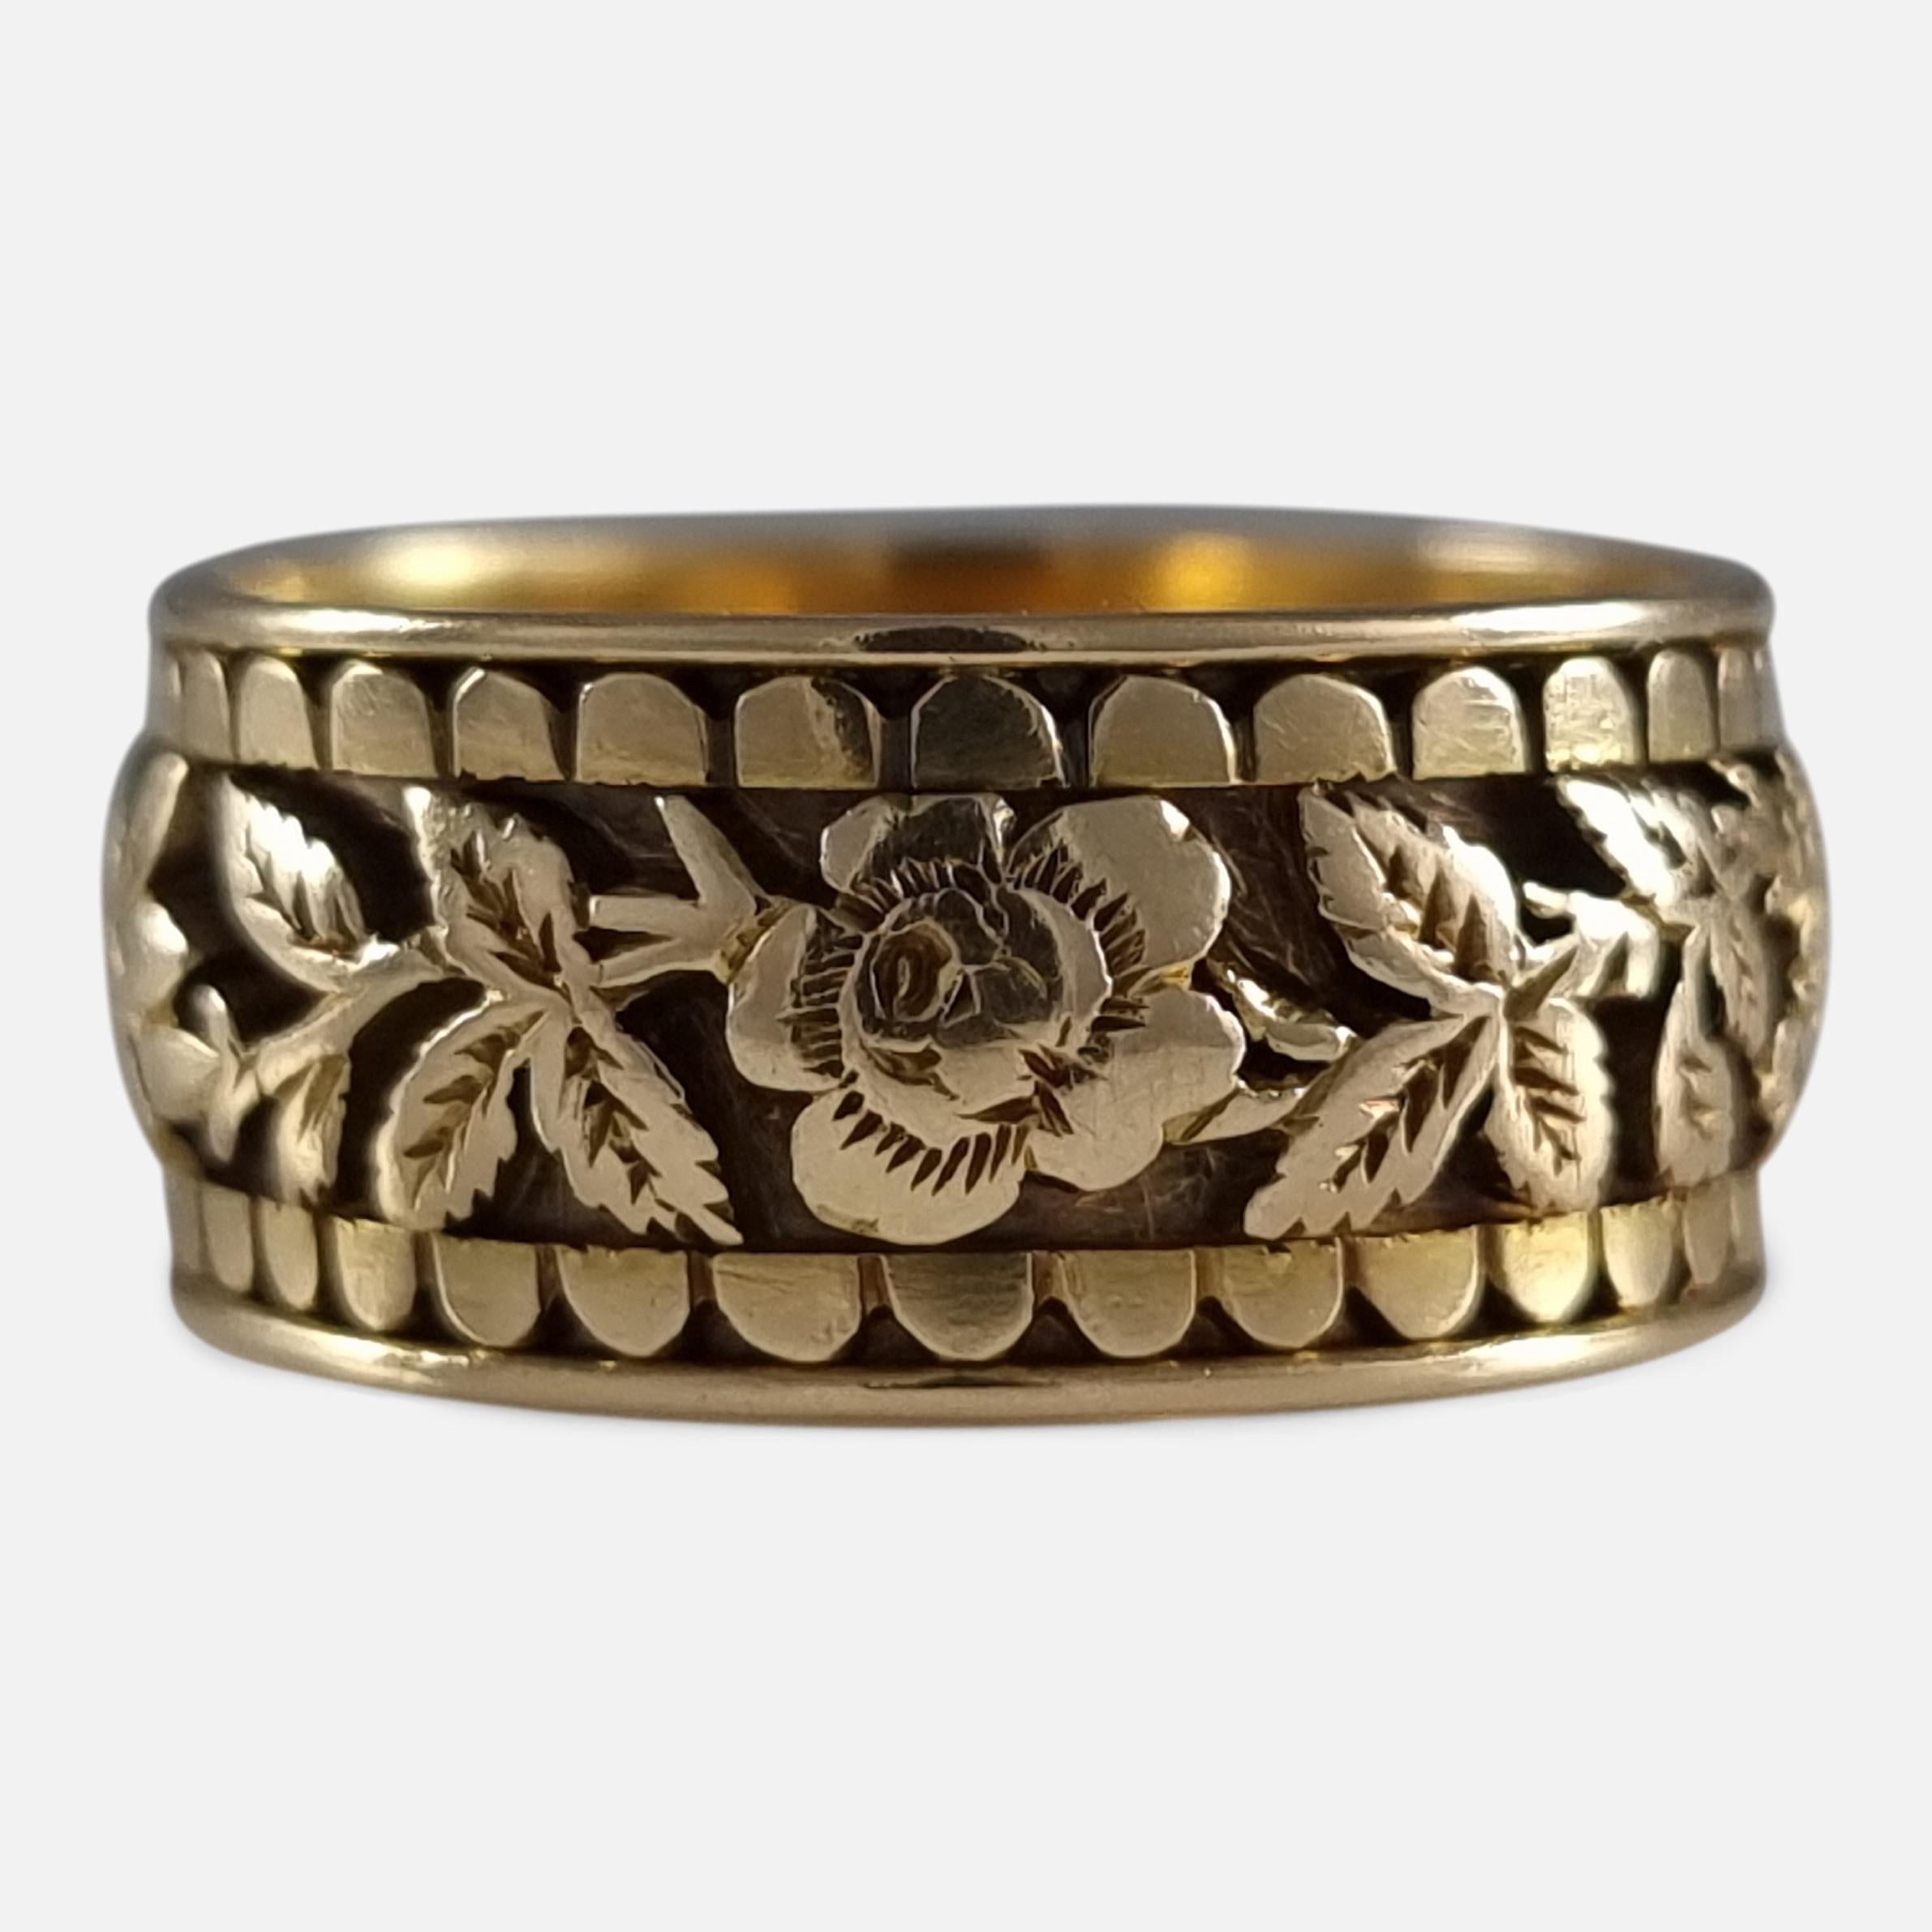 A Victorian 18ct yellow gold engraved Memorial ring. The ring is engraved with a foliate decoration to the exterior, and is inscribed to the interior 'Ellen Tuson, died March 13th 1894 Aged 75'.

The ring is hallmarked with Birmingham marks, '18'